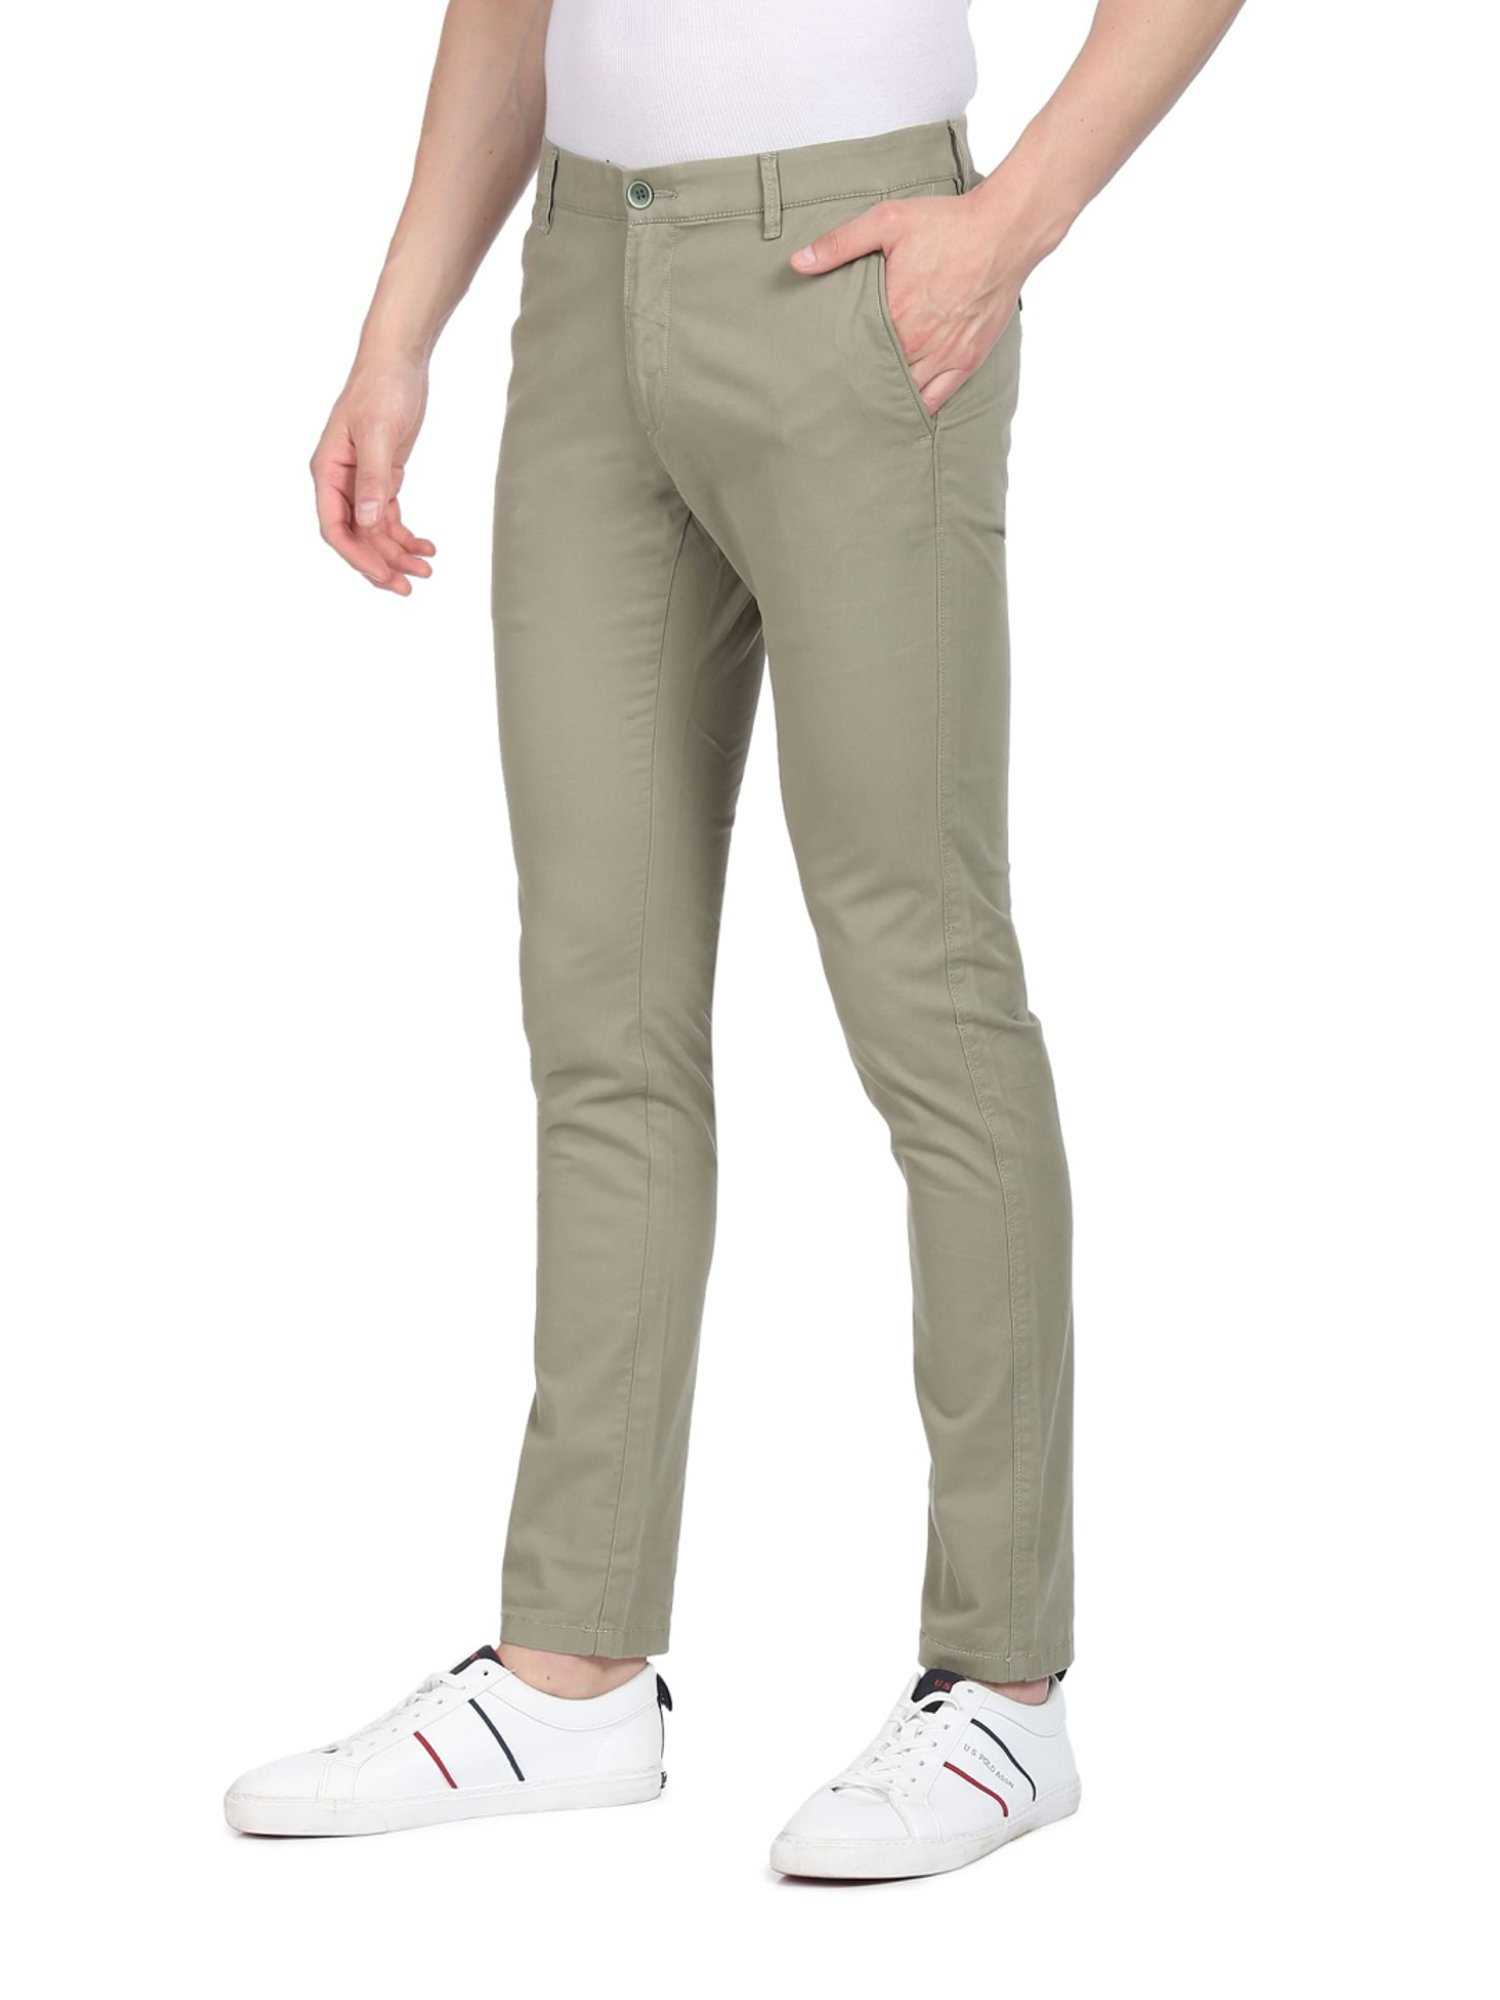 Buy U.S. POLO ASSN. Grey Solid Cotton Stretch Regular Fit Mens Trousers |  Shoppers Stop